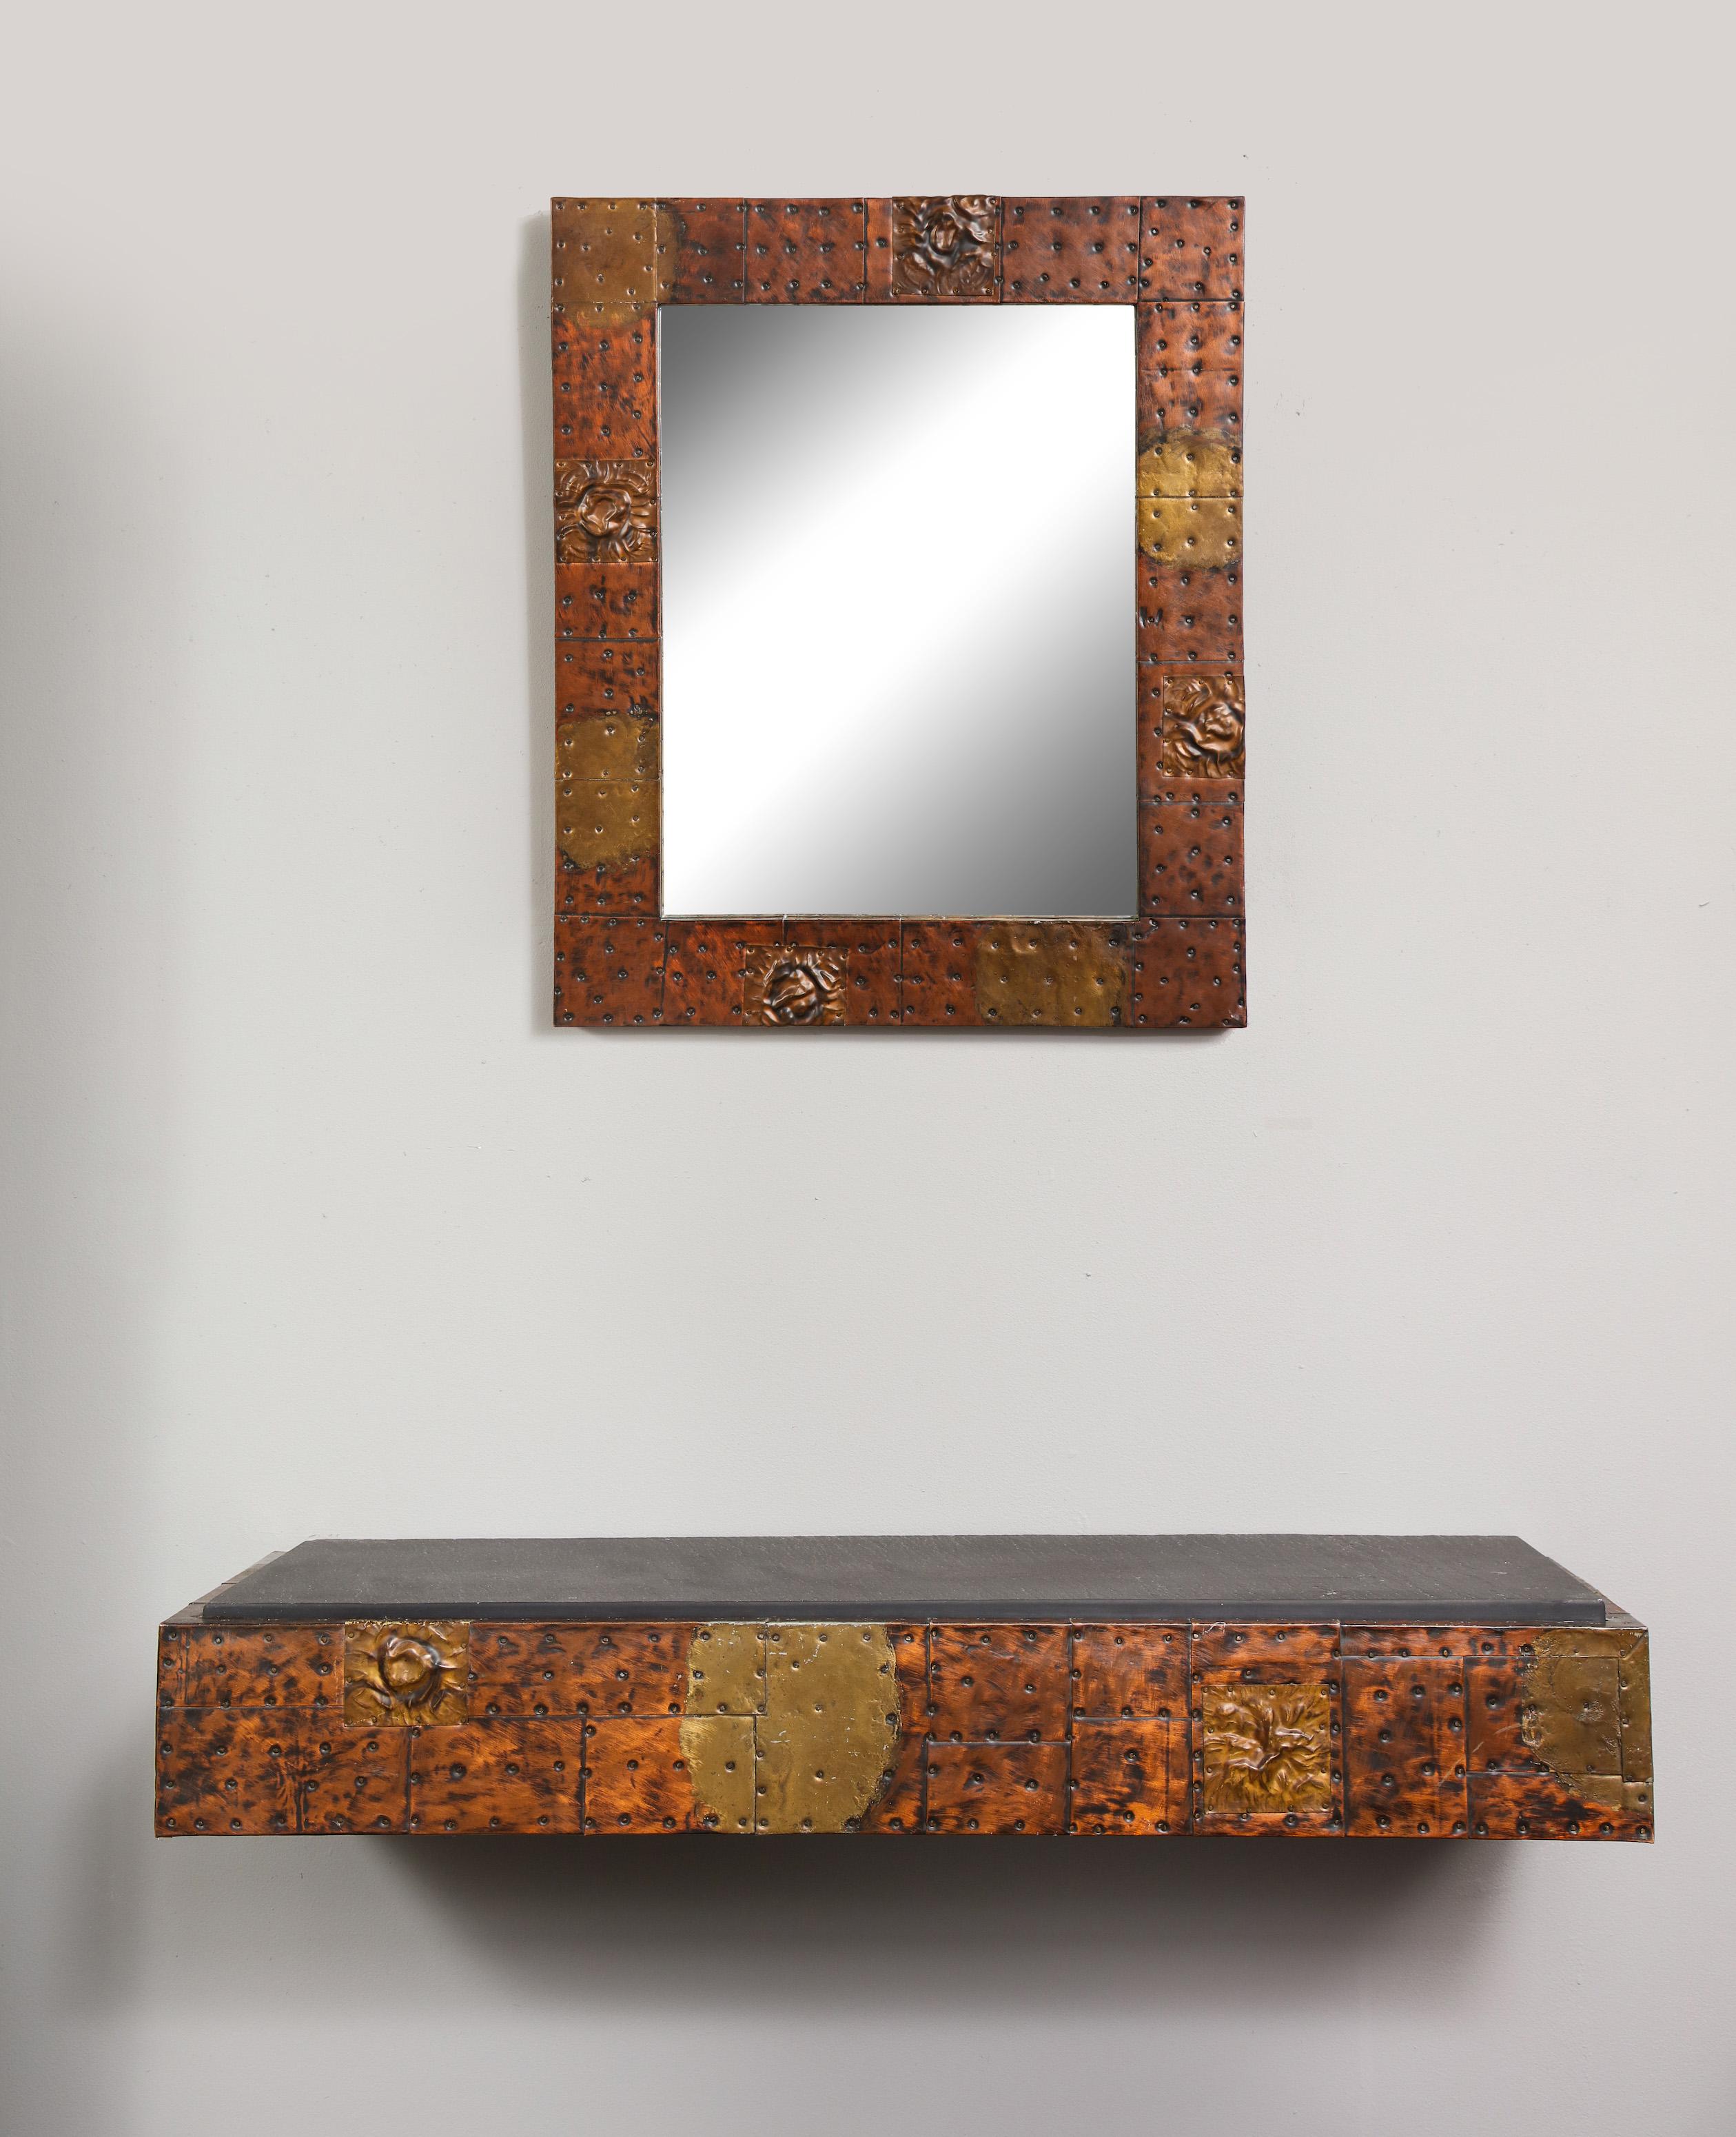 Paul Evans patchwork mirror and wall-mounted console. The dimensions of the console is 5-5/8